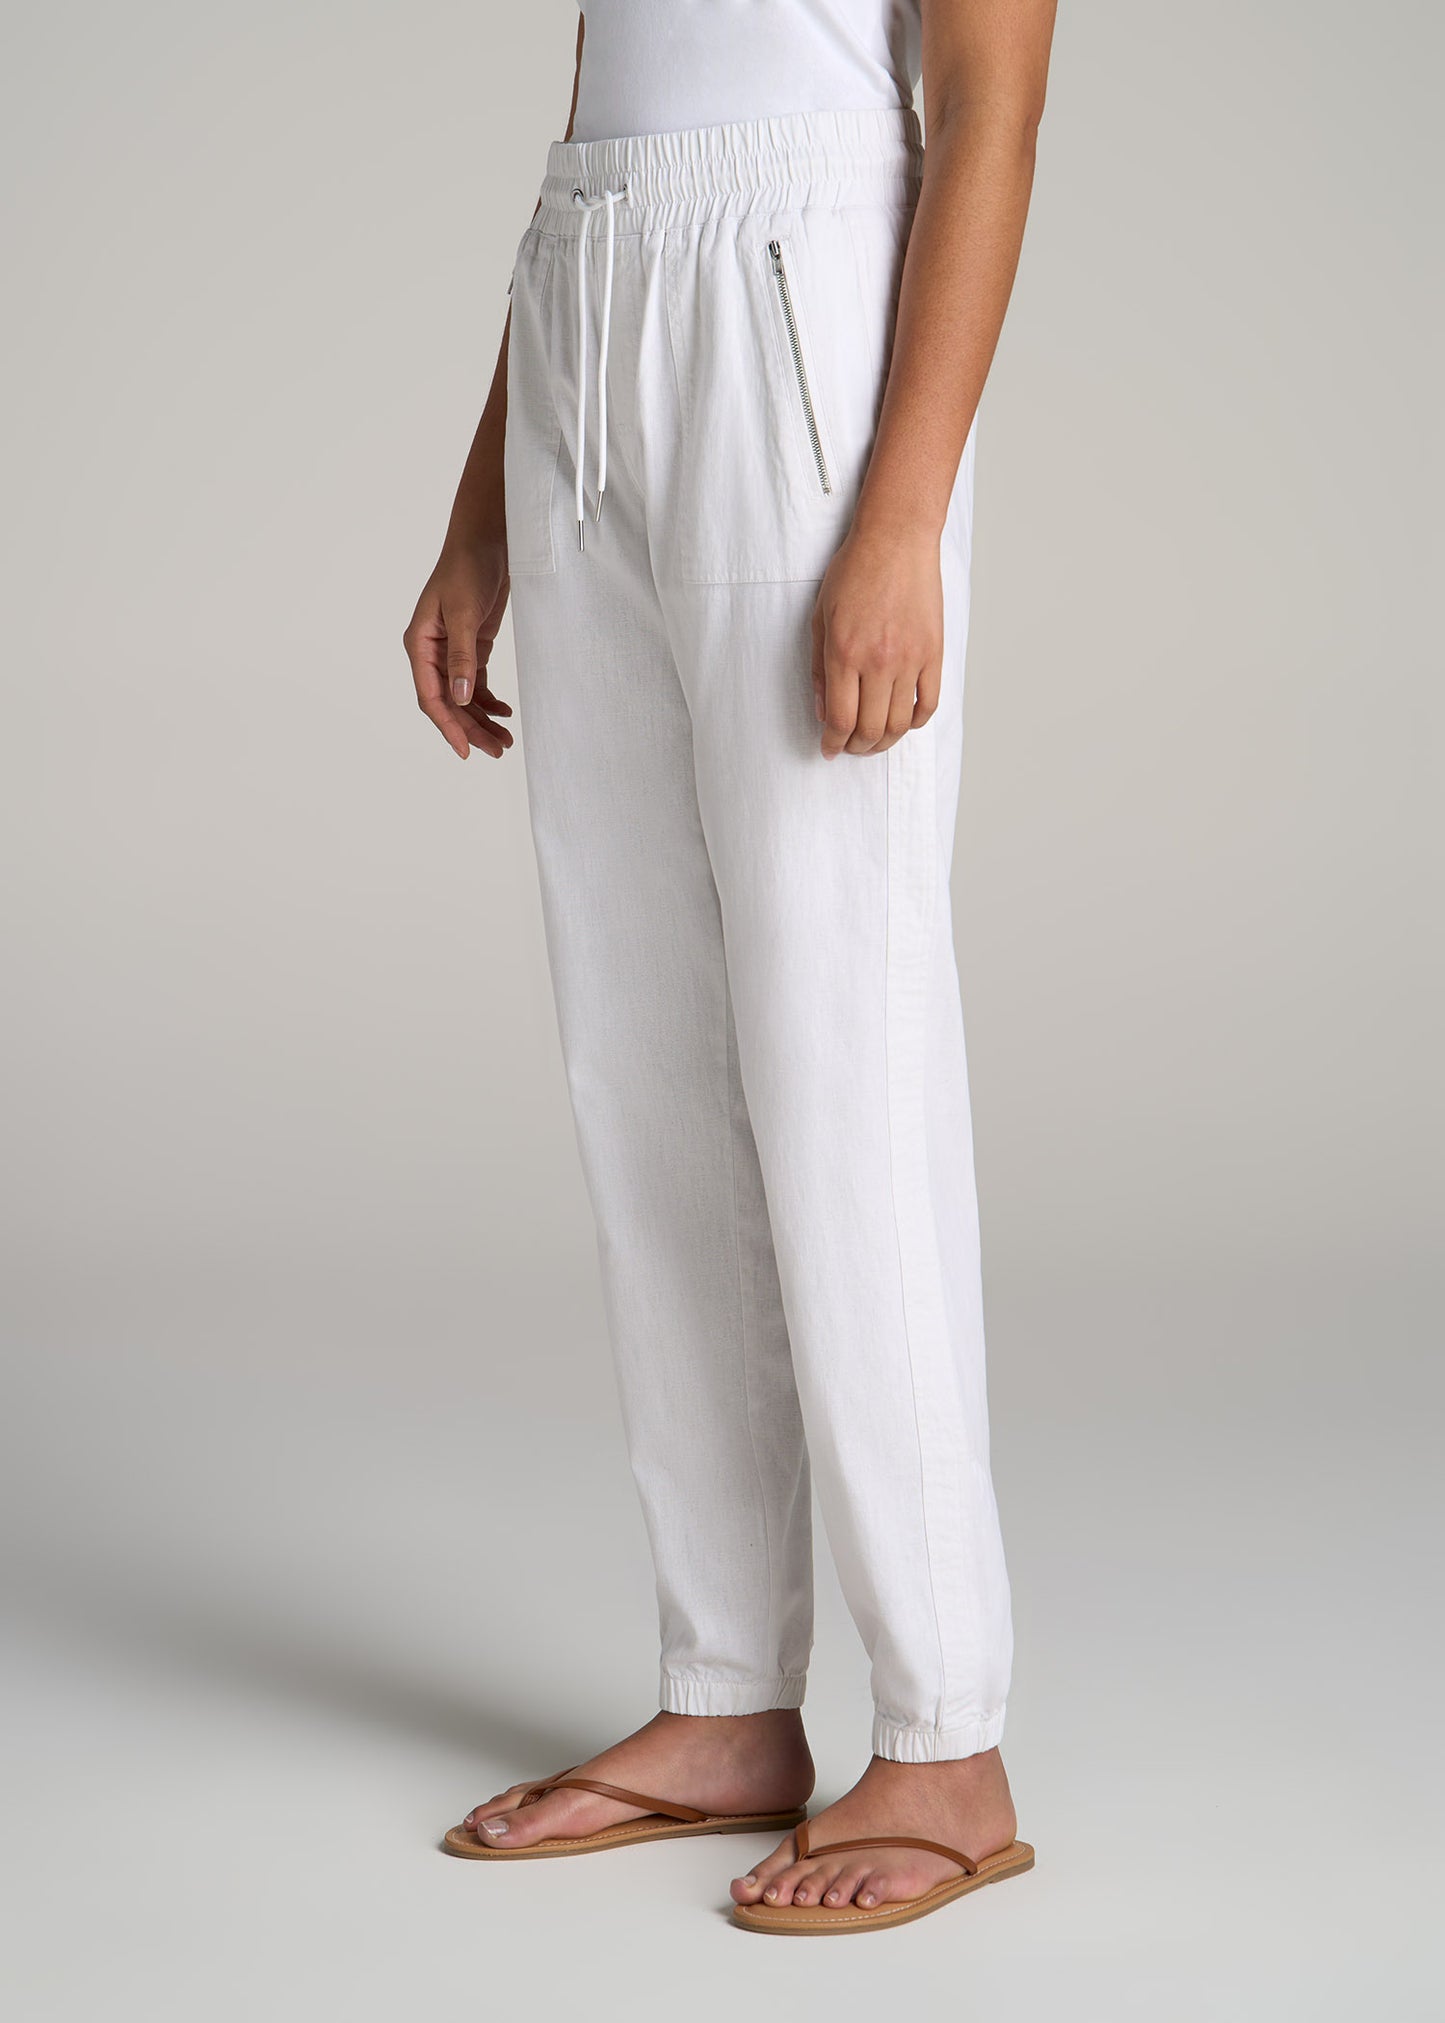 White Joggers for Women